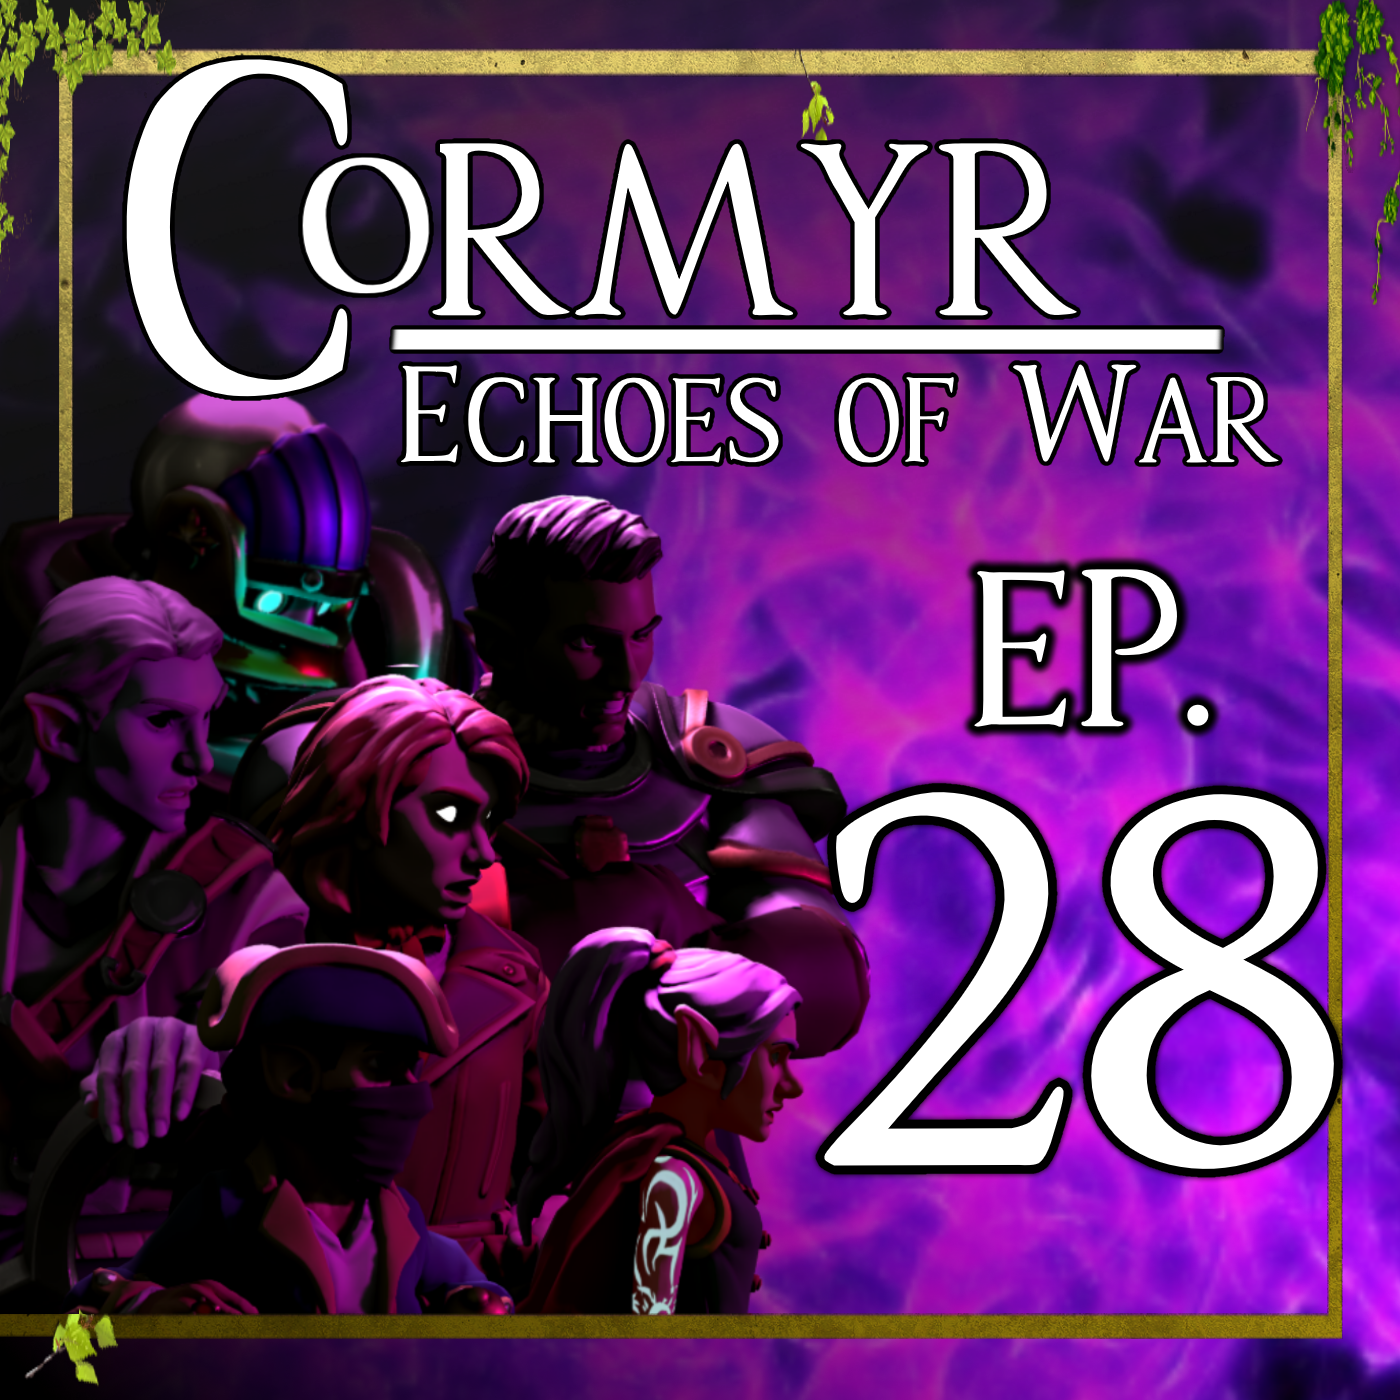 Cormyr: Echoes of War - Ep. 28 - The Emissaries